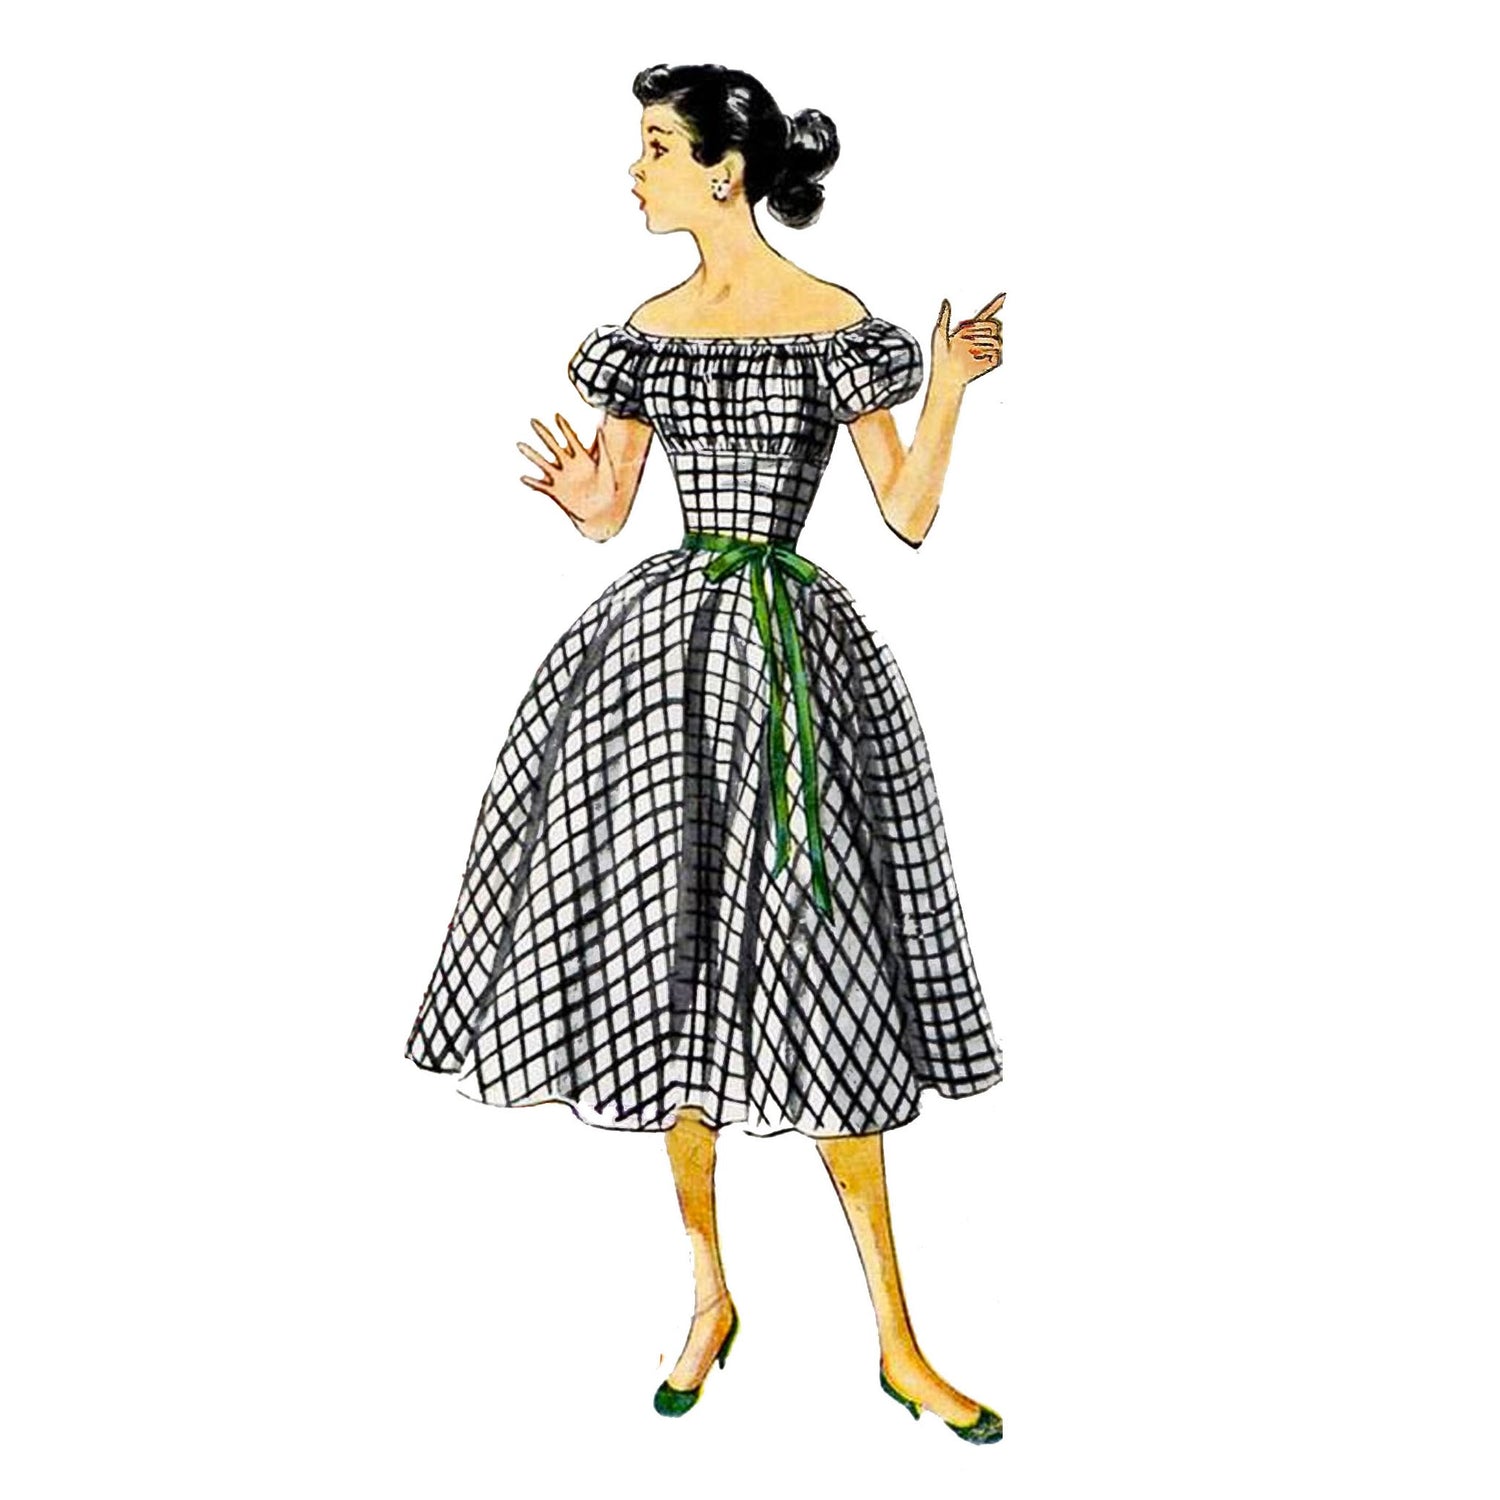 Model wearing Thumbelina dress made from 1950s sewing pattern